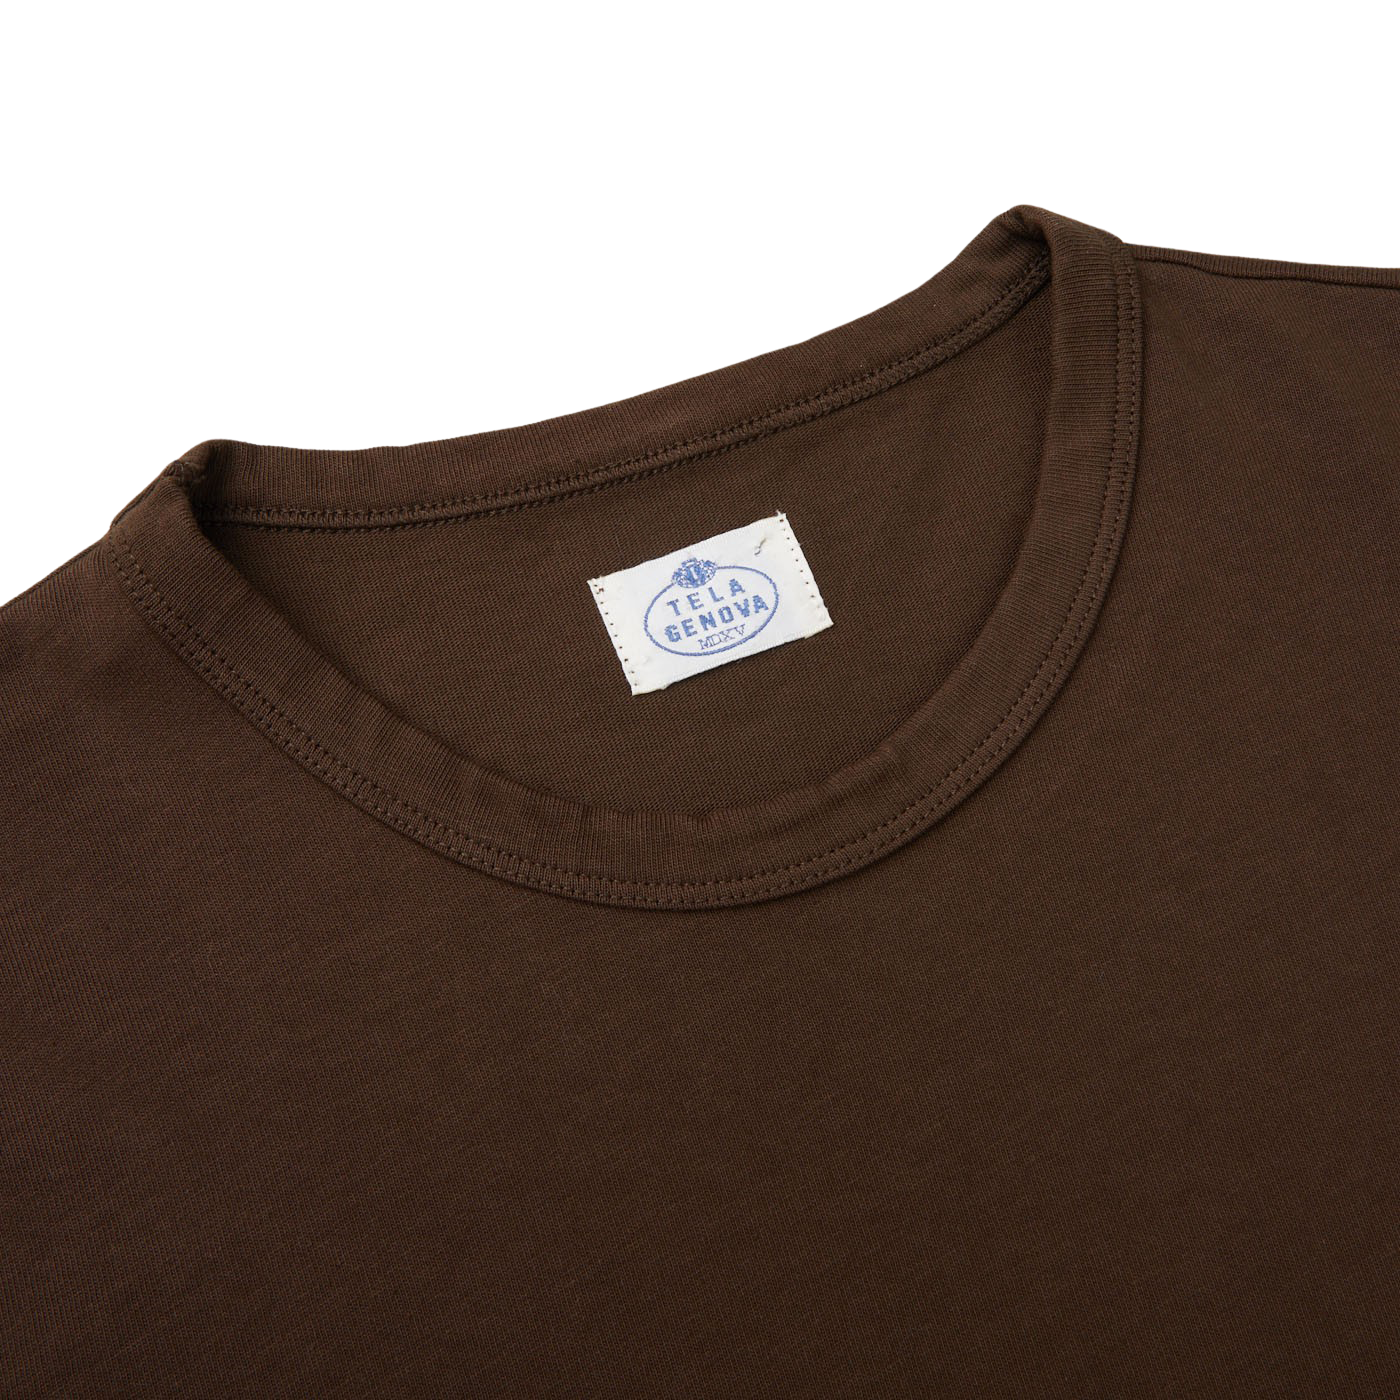 A dark brown organic cotton LS T-shirt with a white label on it from Italian brand Tela Genova.